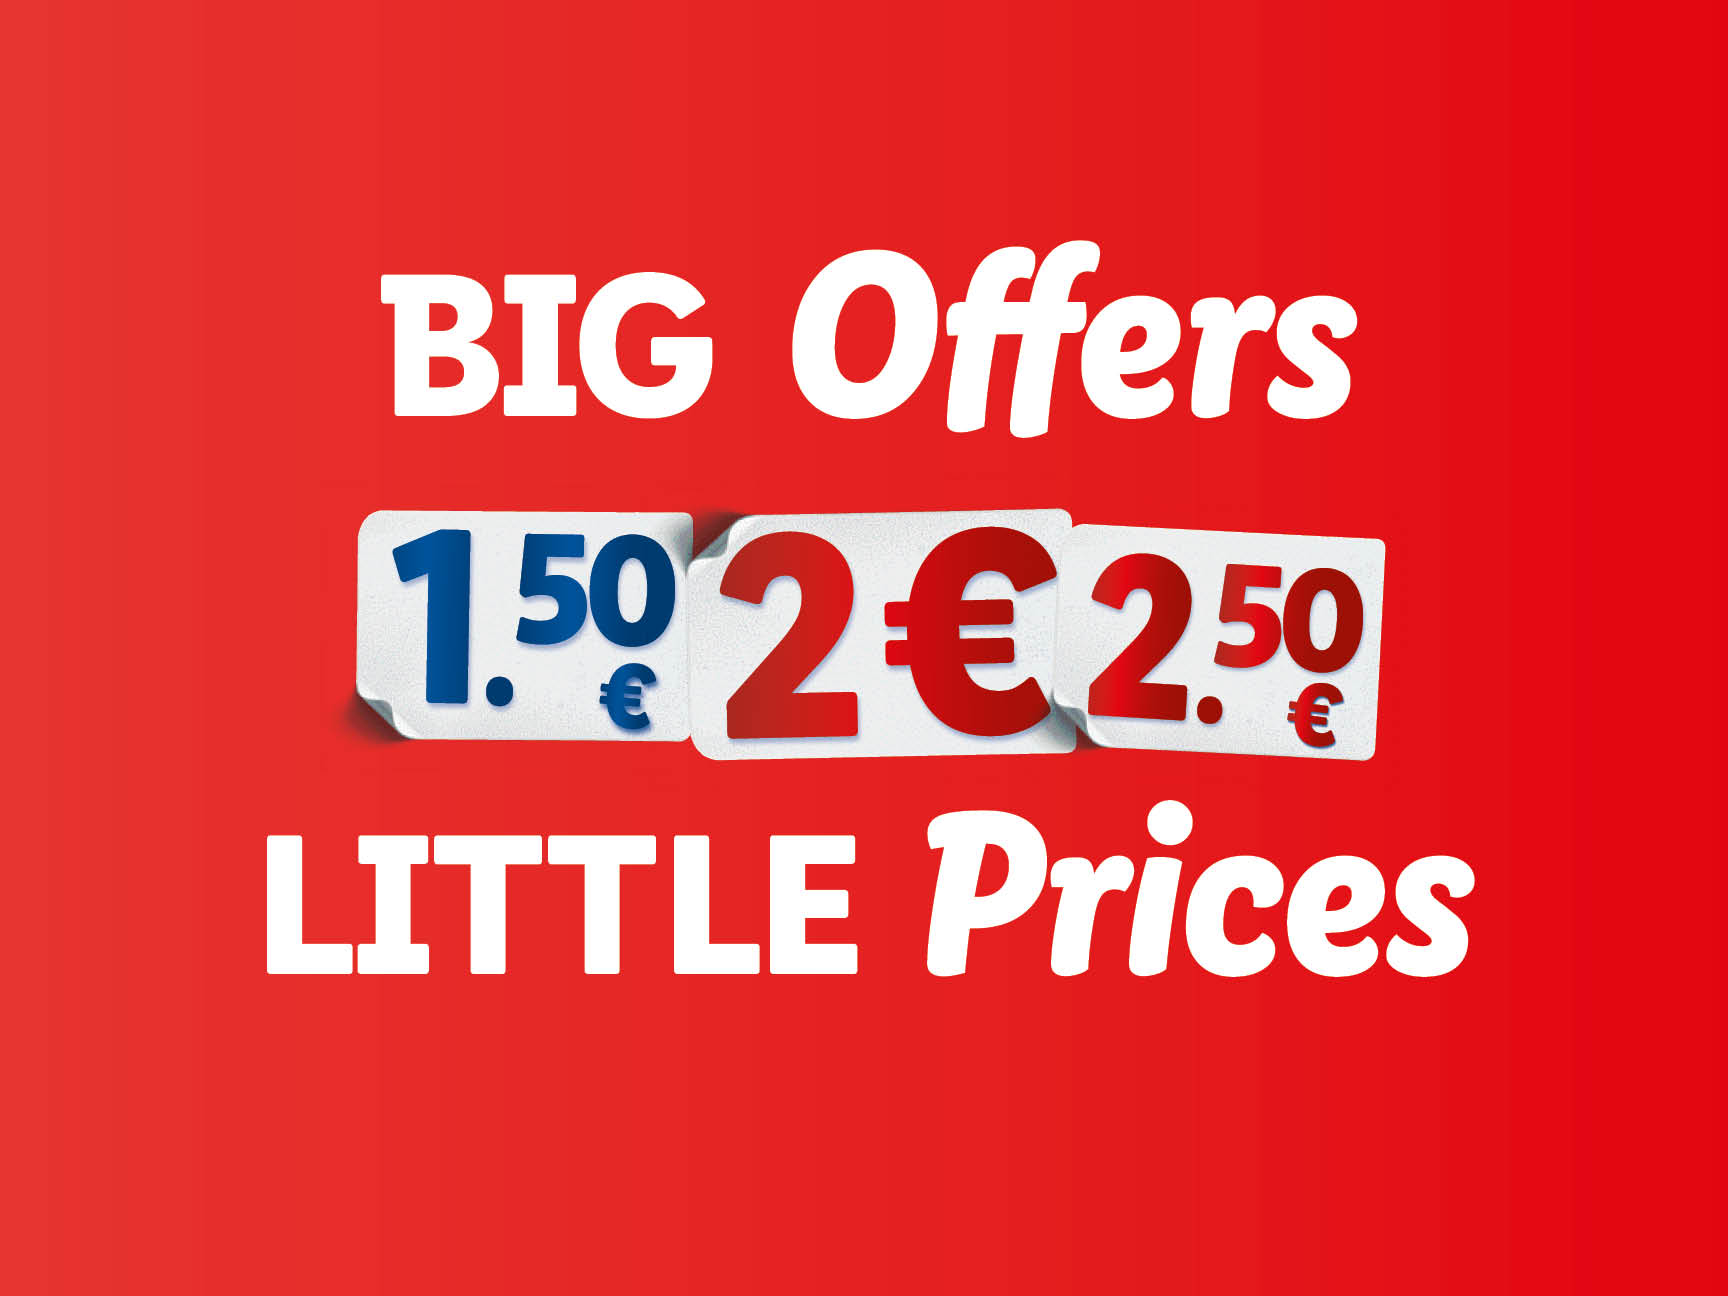 BIG Offers, LITTLE Prices